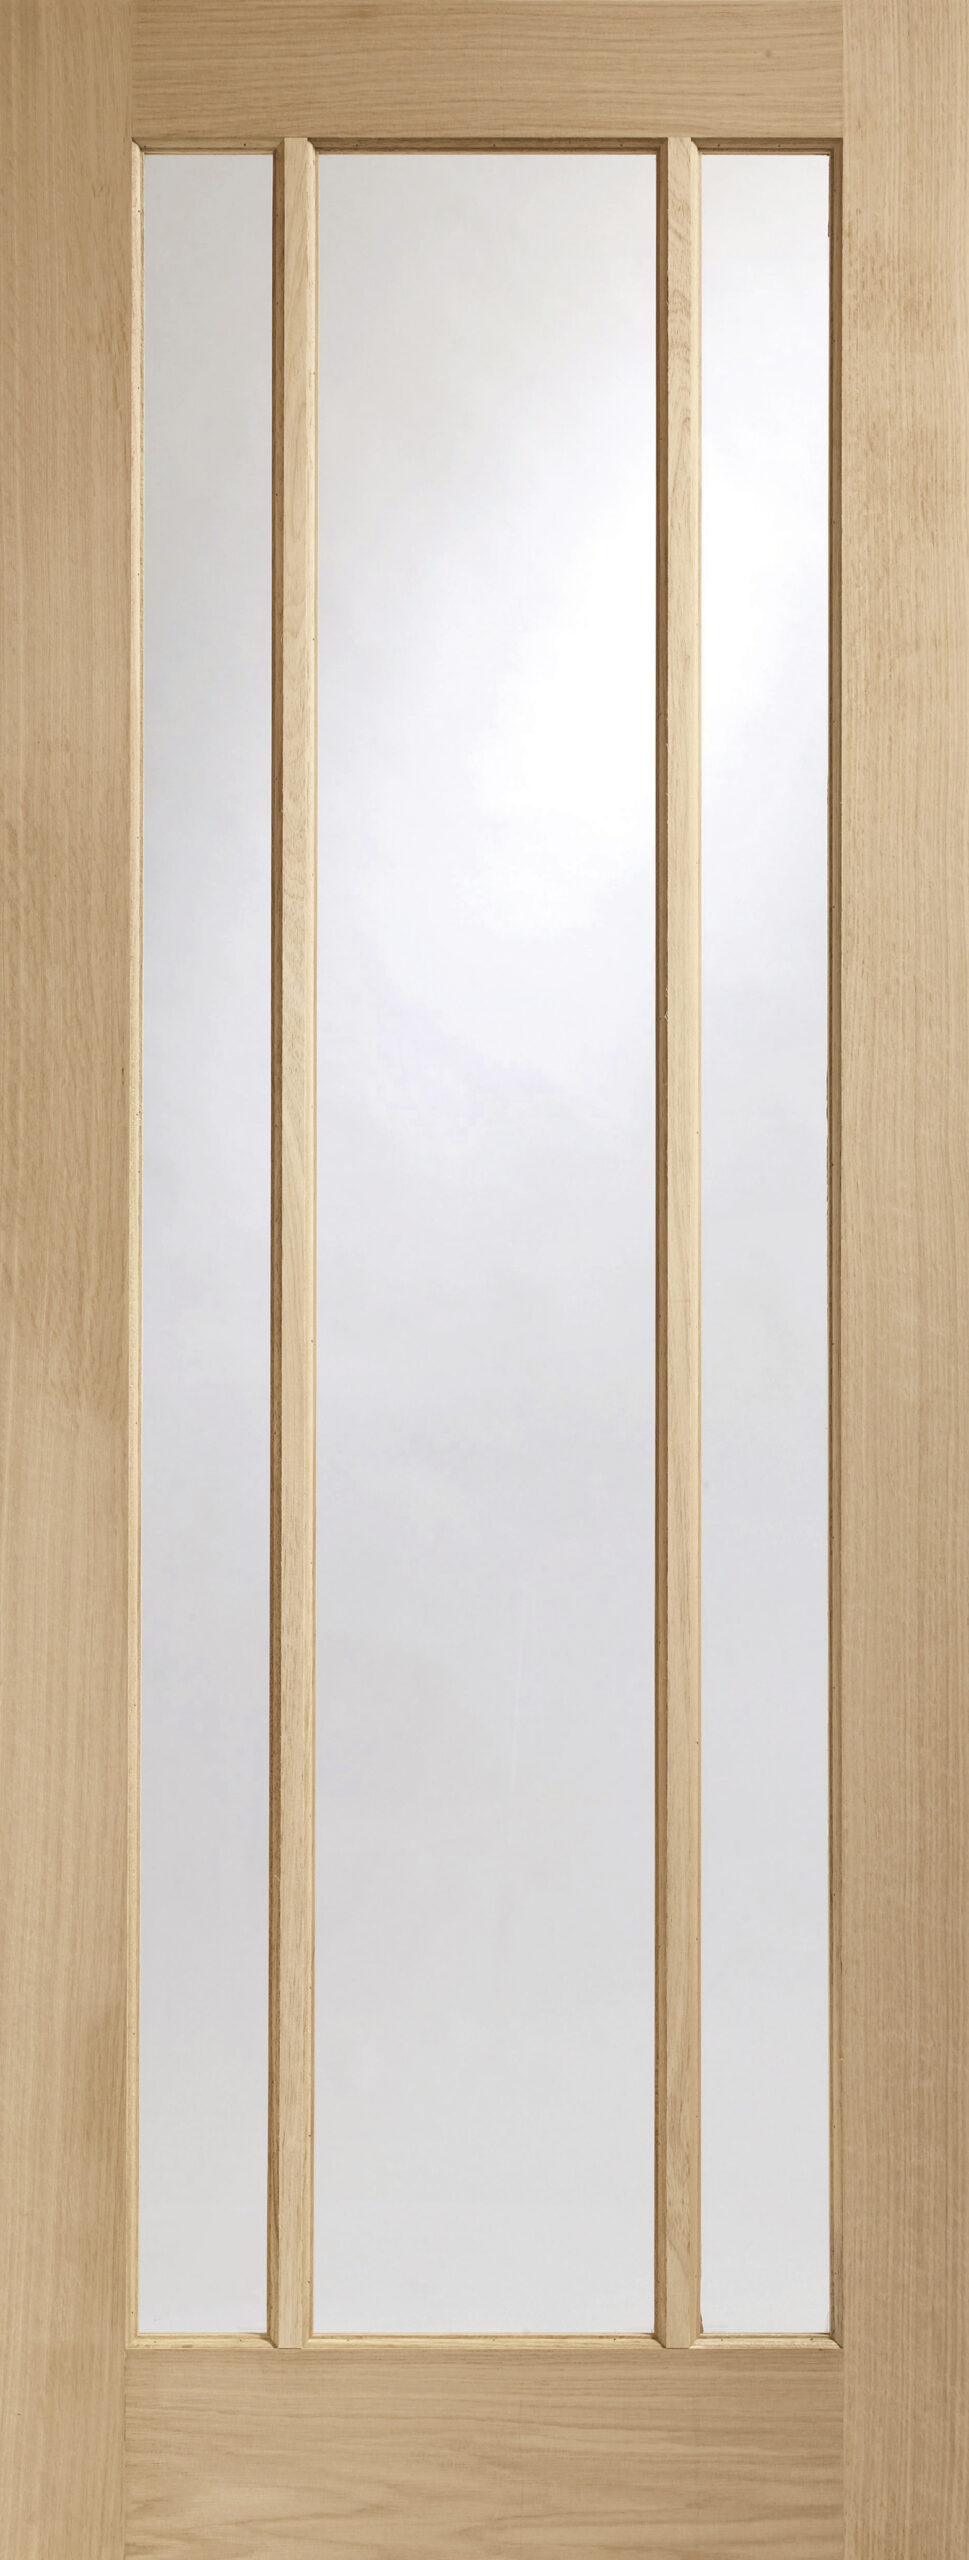 Worcester Internal Oak Door with Clear Glass – Clear Lacquer, 2032 x 813 x 35 mm